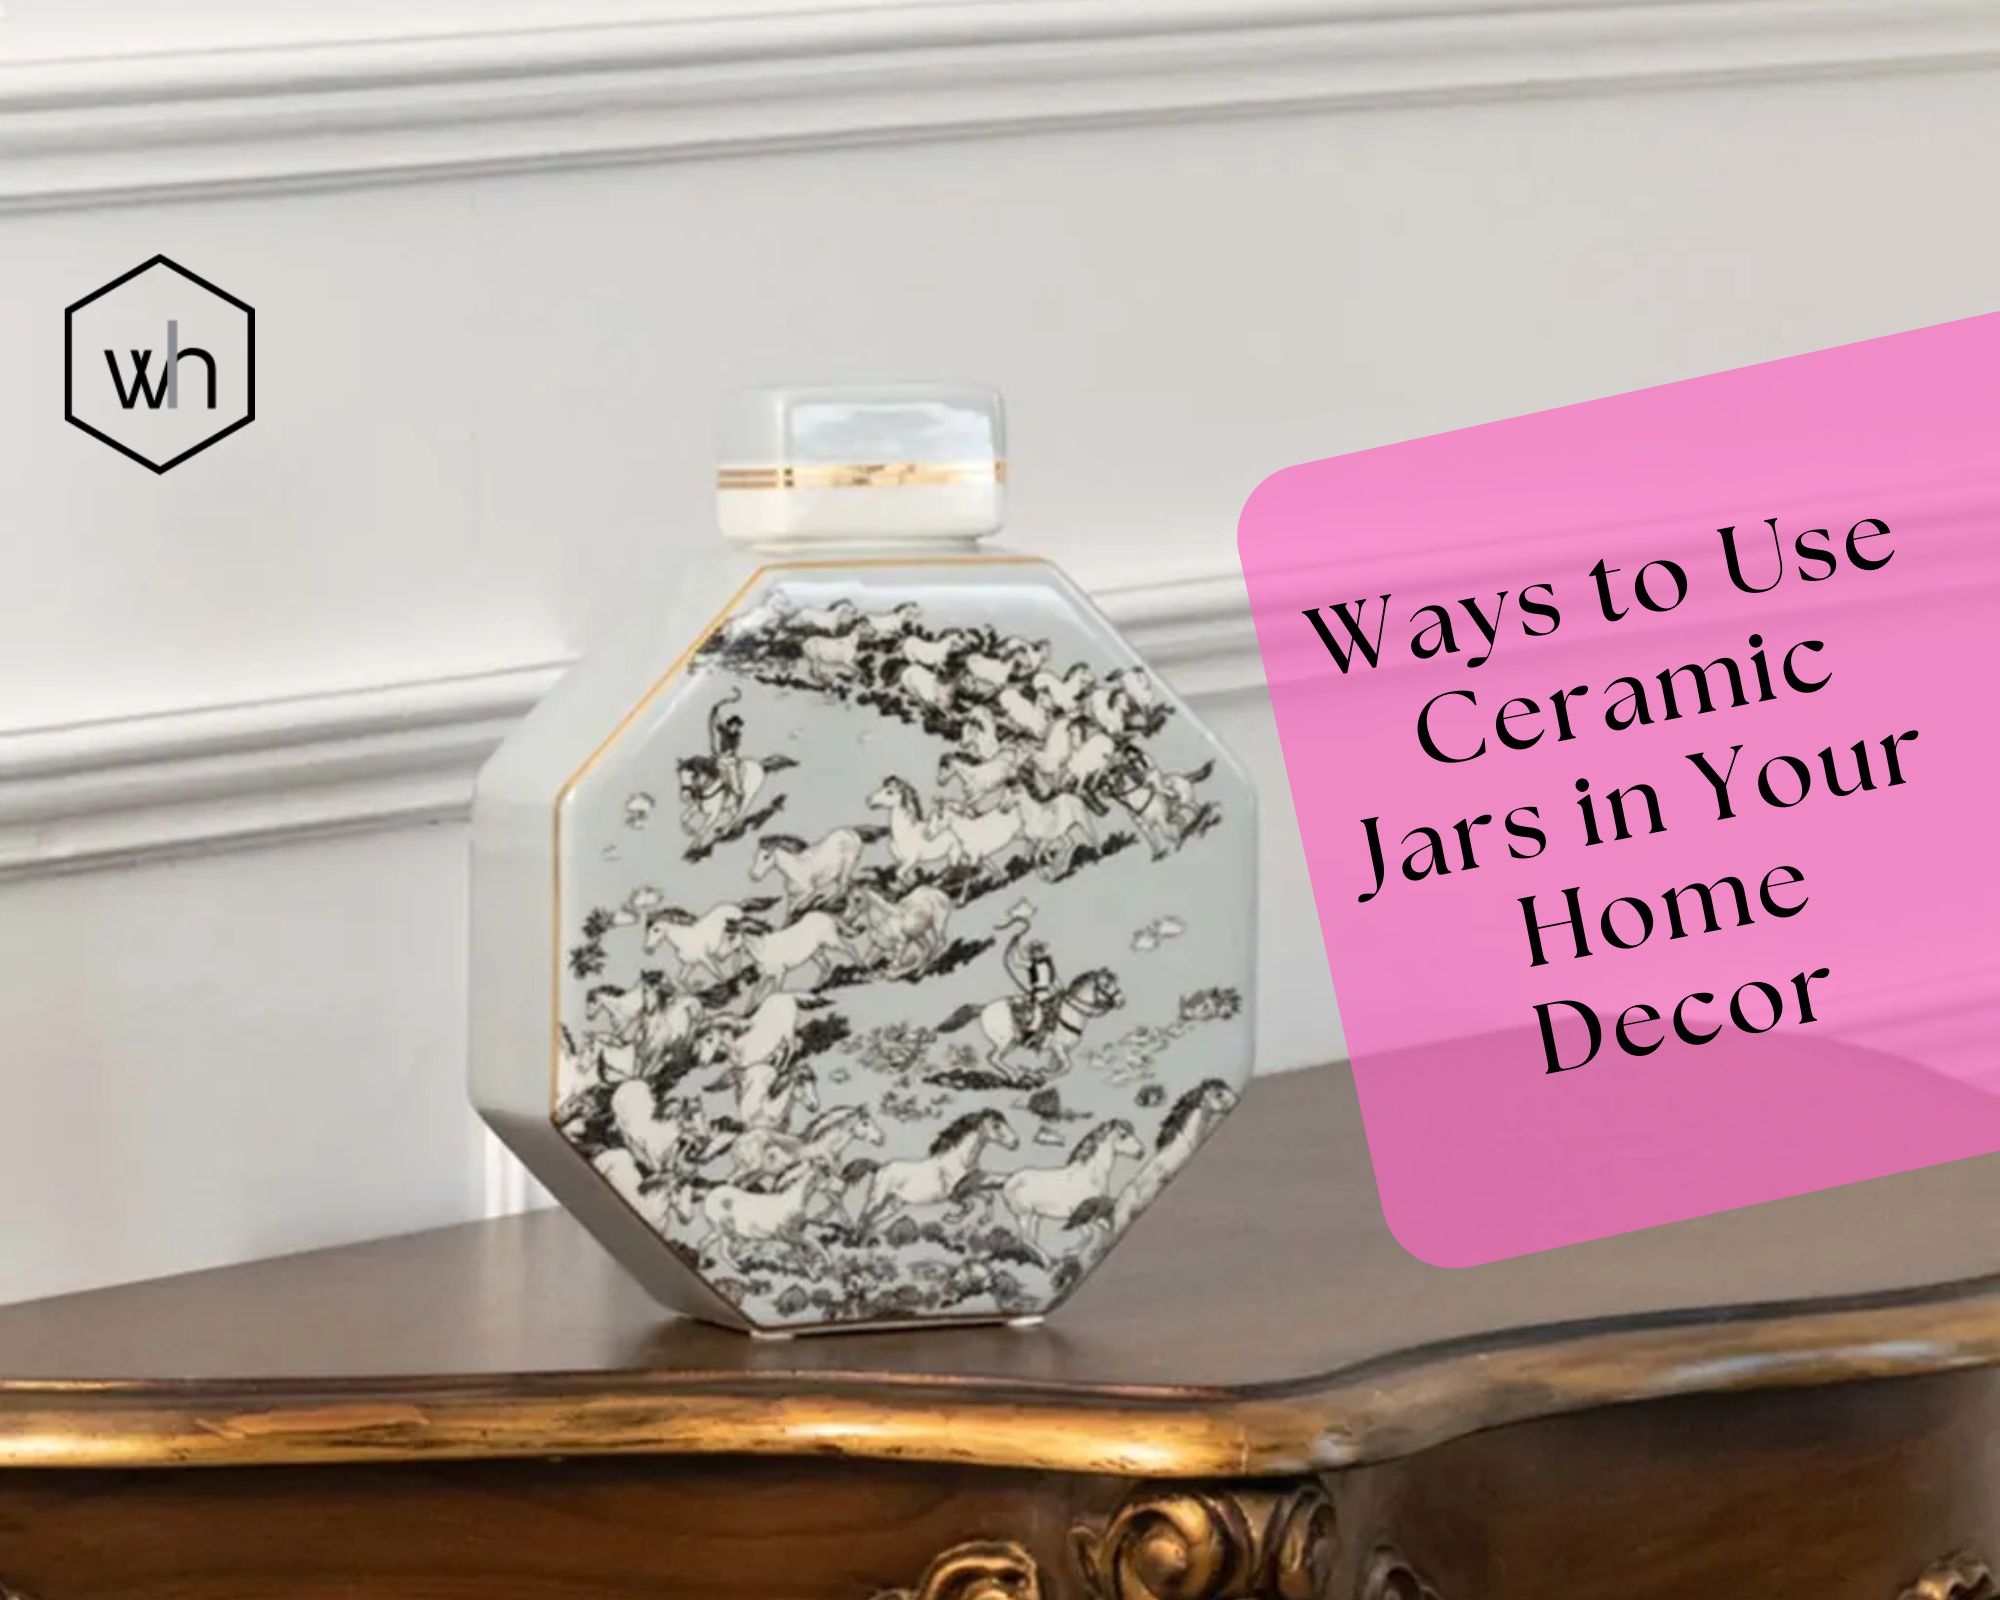 Top 5 Creative Ways to Use Ceramic Jars in Your Home Decor